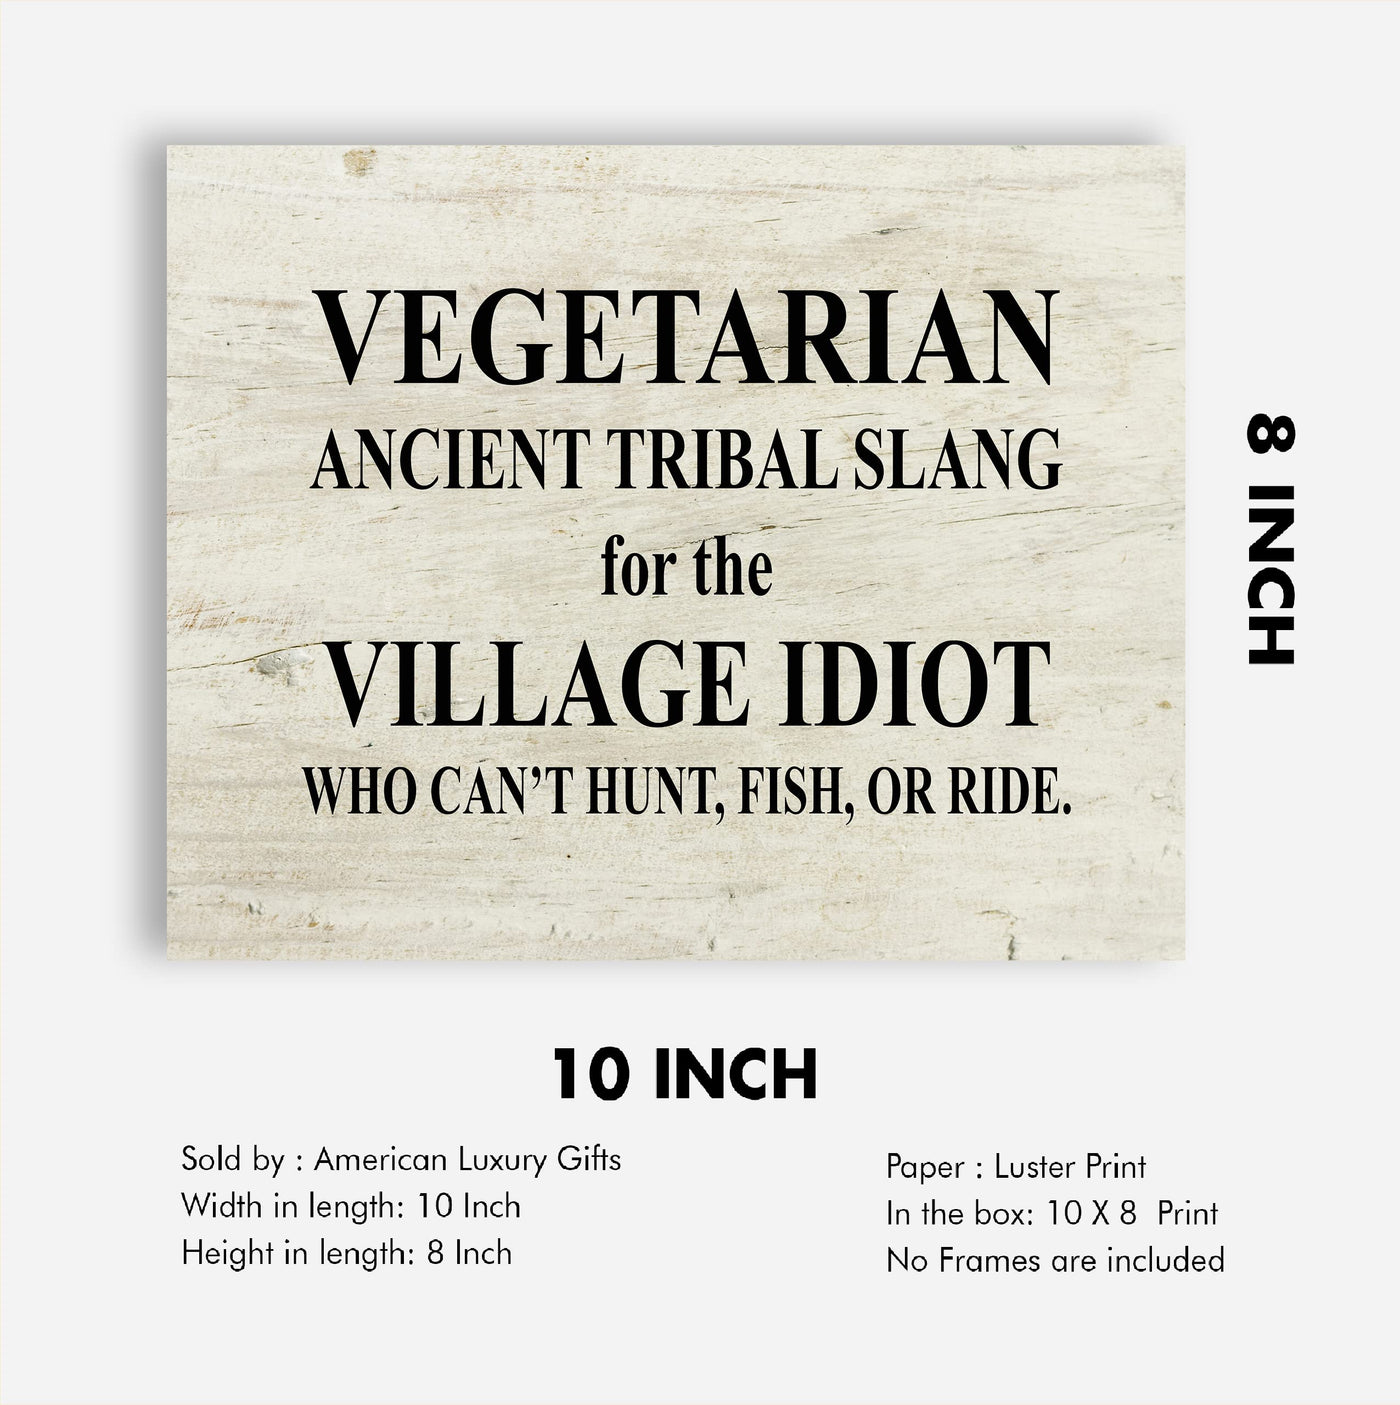 VEGETARIAN-Ancient Tribal Slang for Village Idiot Funny Wall Sign -10 x 8" Humorous Typographic Art Print-Ready to Frame. Home-Office-Bar-Shop-Cave Decor. Fun Novelty Gift for Friends & Family!